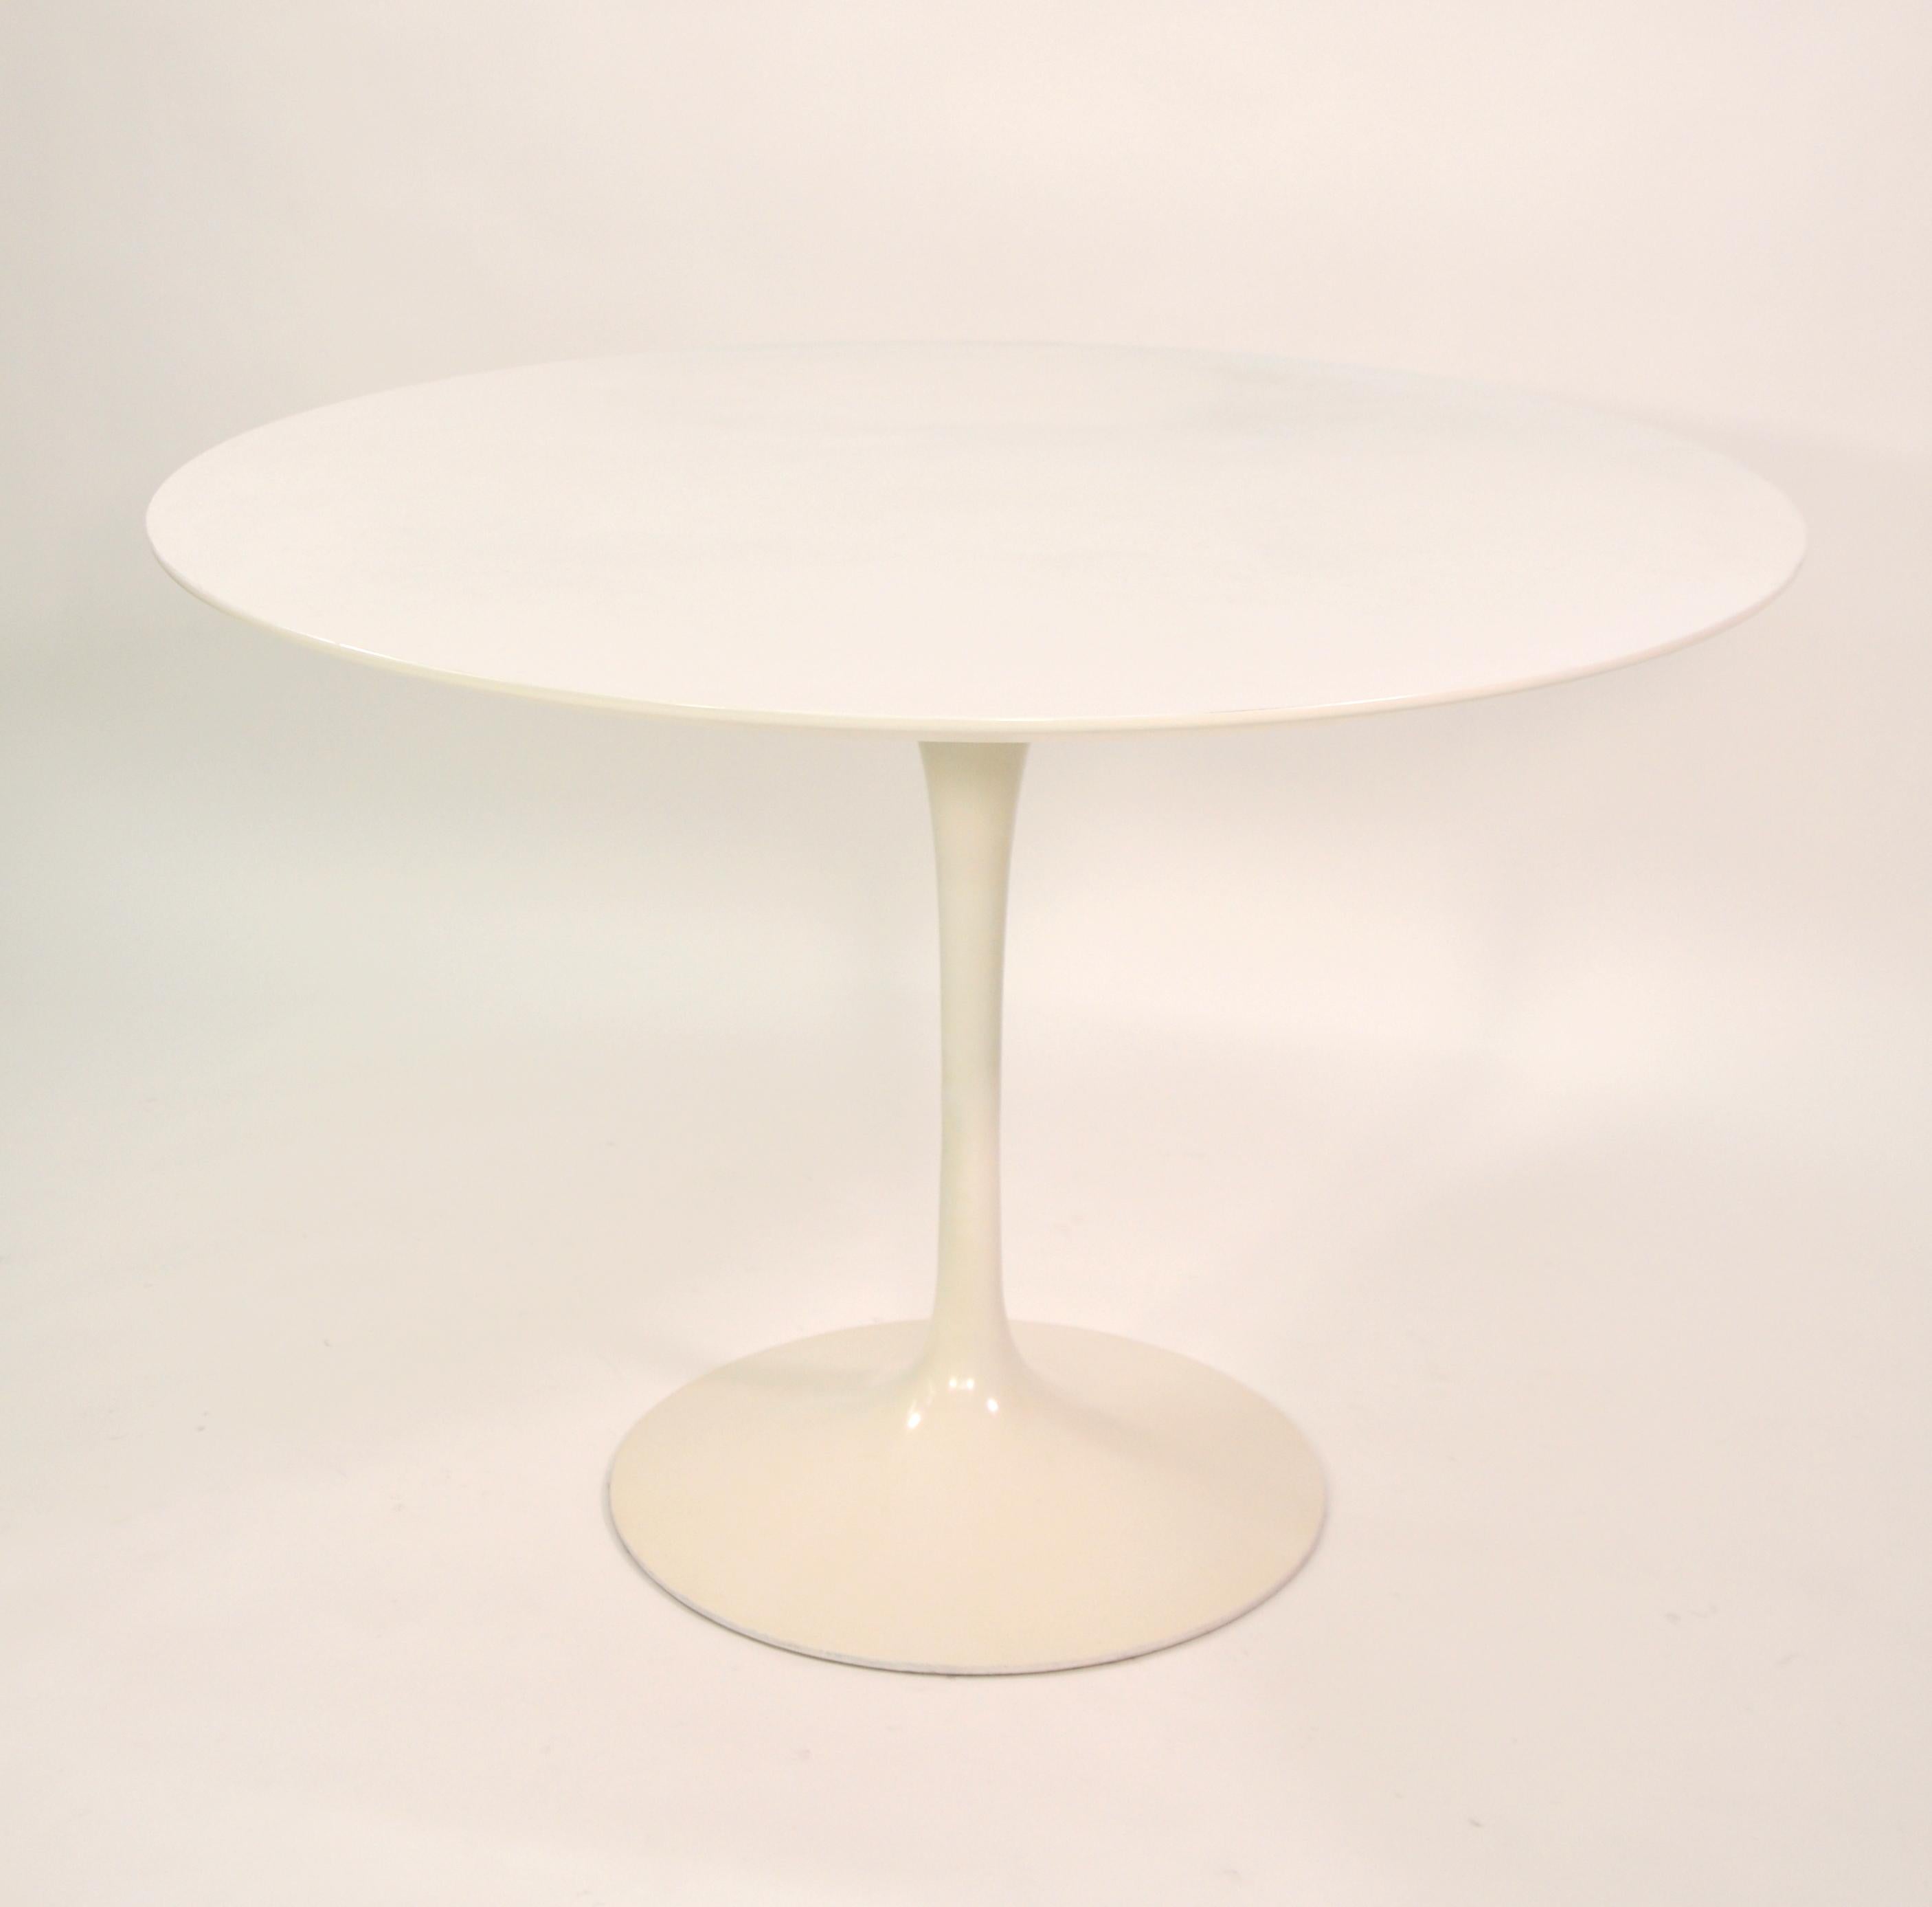 A vintage 1960s Mid-Century Modern off-white round pedestal dining table designed by Eero Saarinen for Knoll. The tabletop is 42 inches and features a white top which allows for ease of use and care. The pedestal base is cast aluminum. The Tulip